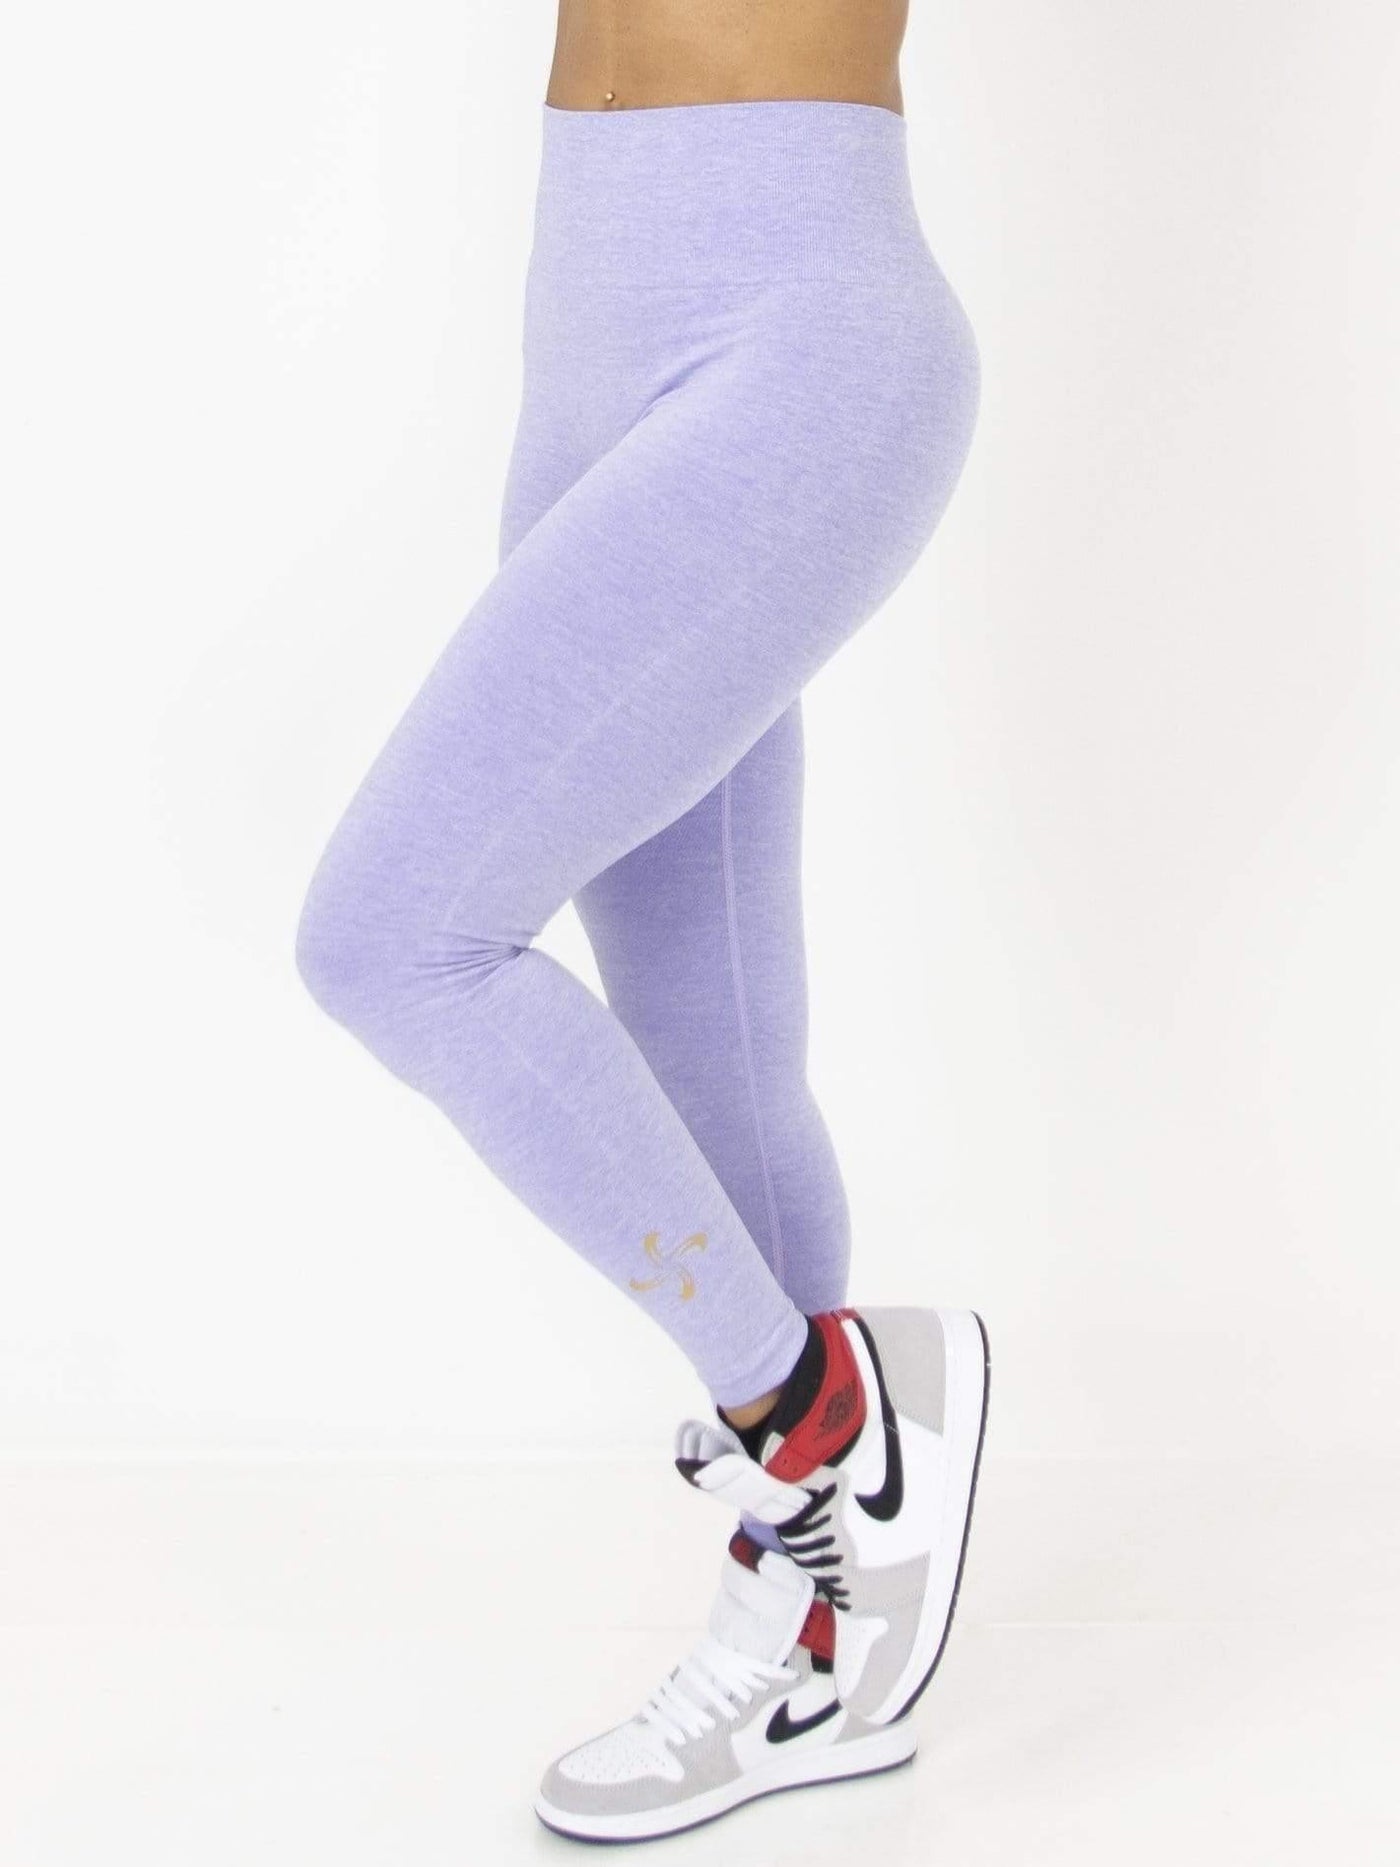 Daint-Hearted | Lilac Activewear Set - Statement Piece NY _tab_size-chart, Activewear, Activewear & Loungewear, Brooklyn Boutique, chic, leggings, Lounge, Misses, not clearance, Purple, Set, Sets, Ships from USA, Short sleeve, SPNY Exclusive, statement, Statement Clothing, statement lounge, statement piece, Statement Piece Boutique, statement piece ny, Statement Pieces, Statement Pieces Boutique, Women's Boutique Activewear